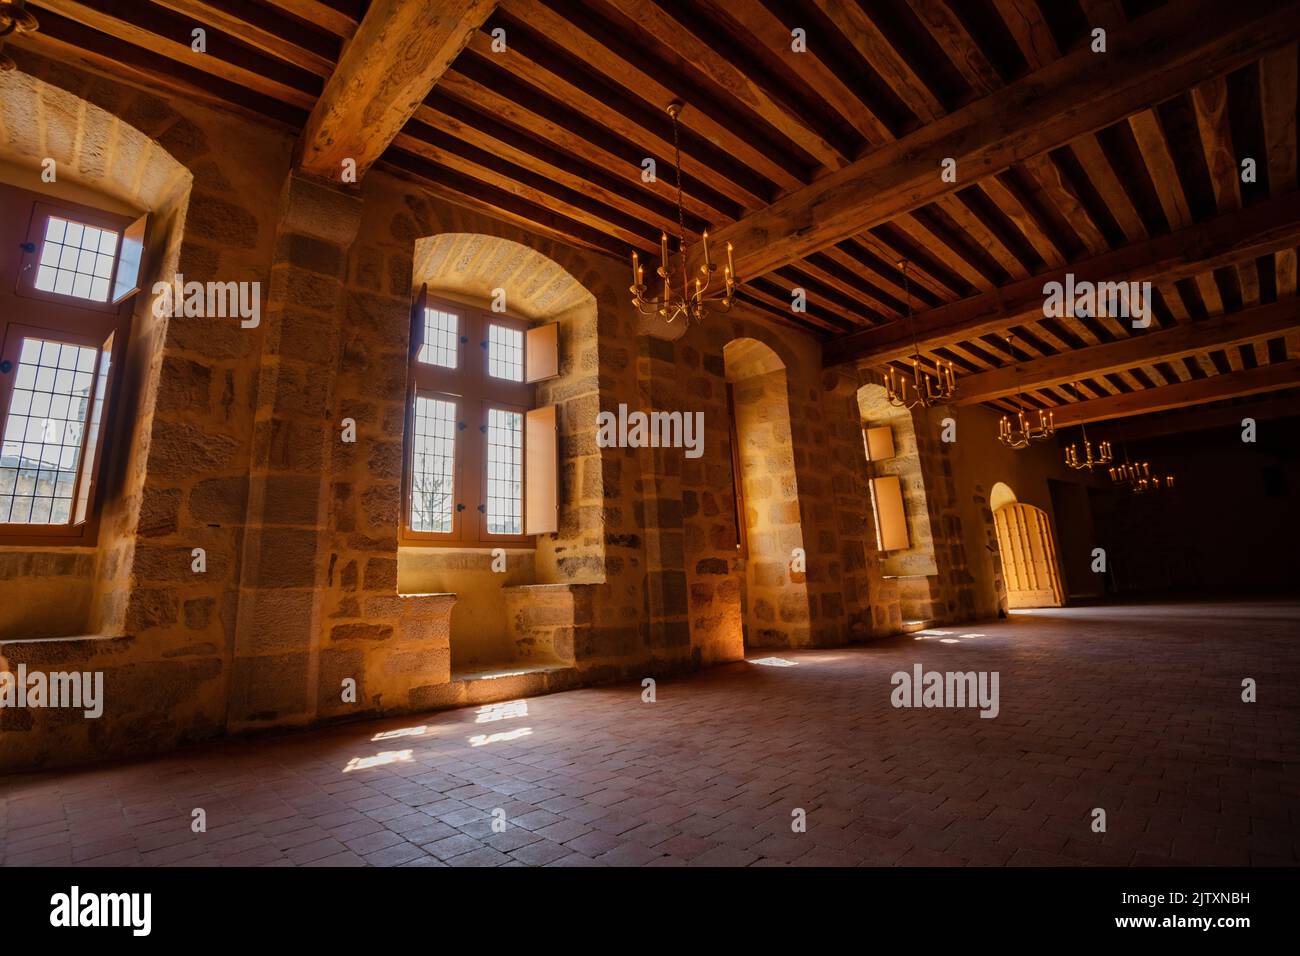 Old castle building interior with stone walls and wooden ceiling Stock Photo